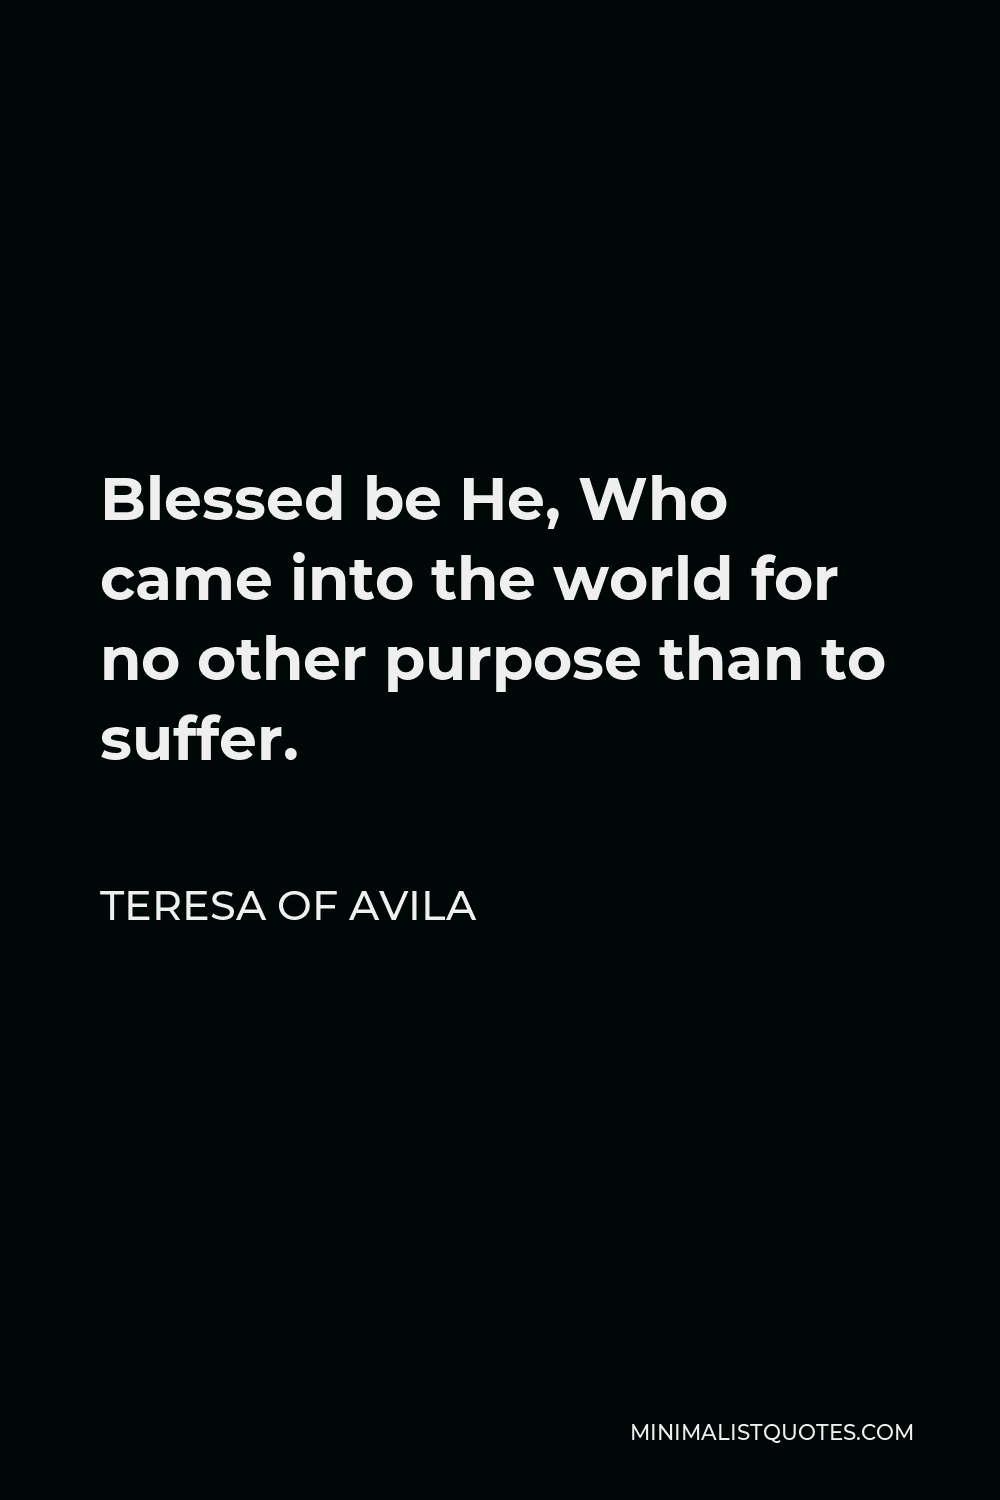 Teresa of Avila Quote - Blessed be He, Who came into the world for no other purpose than to suffer.